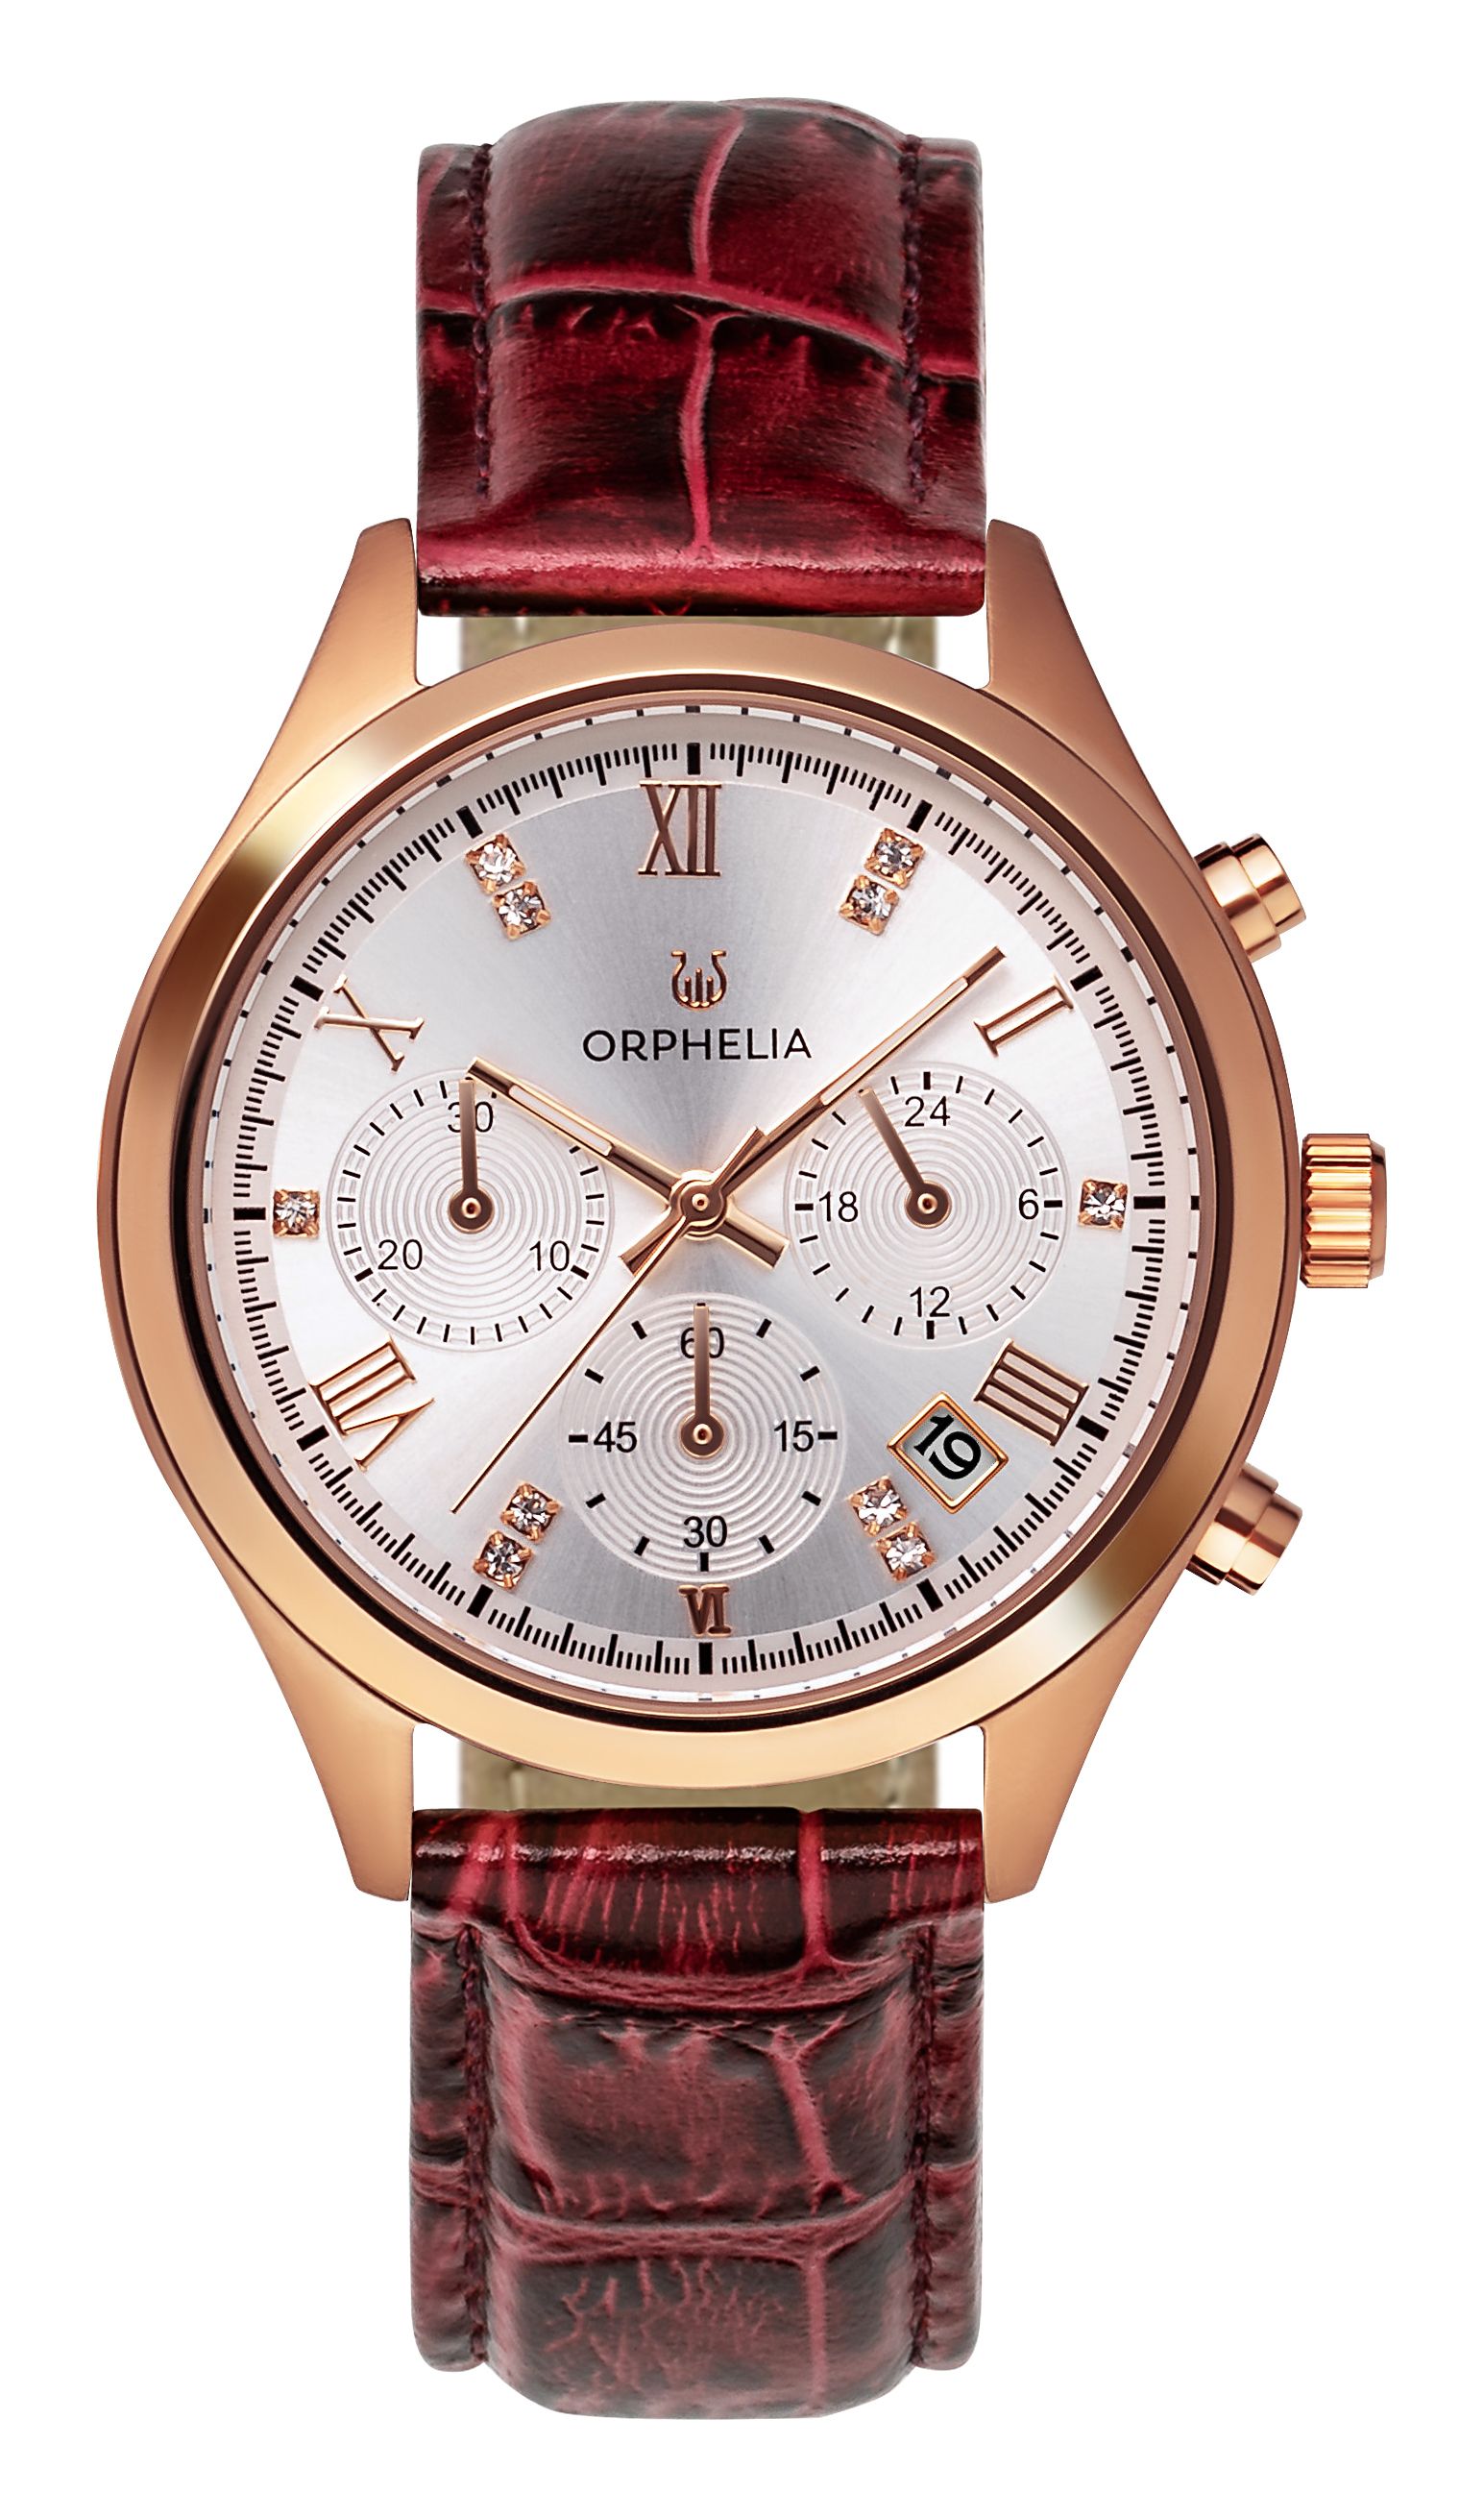 This Orphelia Regal Chronograph Watch for Women is the perfect timepiece to wear or to gift. It's Pink 38 mm Round case combined with the comfortable Burgundy Leather watch band will ensure you enjoy this stunning timepiece without any compromise. Operated by a high quality Quartz movement and water resistant to 5 bars, your watch will keep ticking. MODERN LUXURY DESIGN: This Orphelia Regal Chronograph watch with a Miyota Japanese Quartz movement includes a date display. The dial is setted with beautifull stones with Roman numeral. Some extra features  are 24 hour display and Luminous Hands. This watch will give you a Luxery look. PREMIUM QUALITY: By using high-quality materials, Glass: Mineral Glass, Case material: Stainless steel, Bracelet material: Crocodile-embossed Leather- Water resistant: 5 bars COMPACT SIZE: Case diameter: 38 mm, Height: 10 mm, Strap- Length: 22 cm, Width: 17 mm. Due to this practical handy size, the watch is absolutely for everyday use-Weight: 44 g